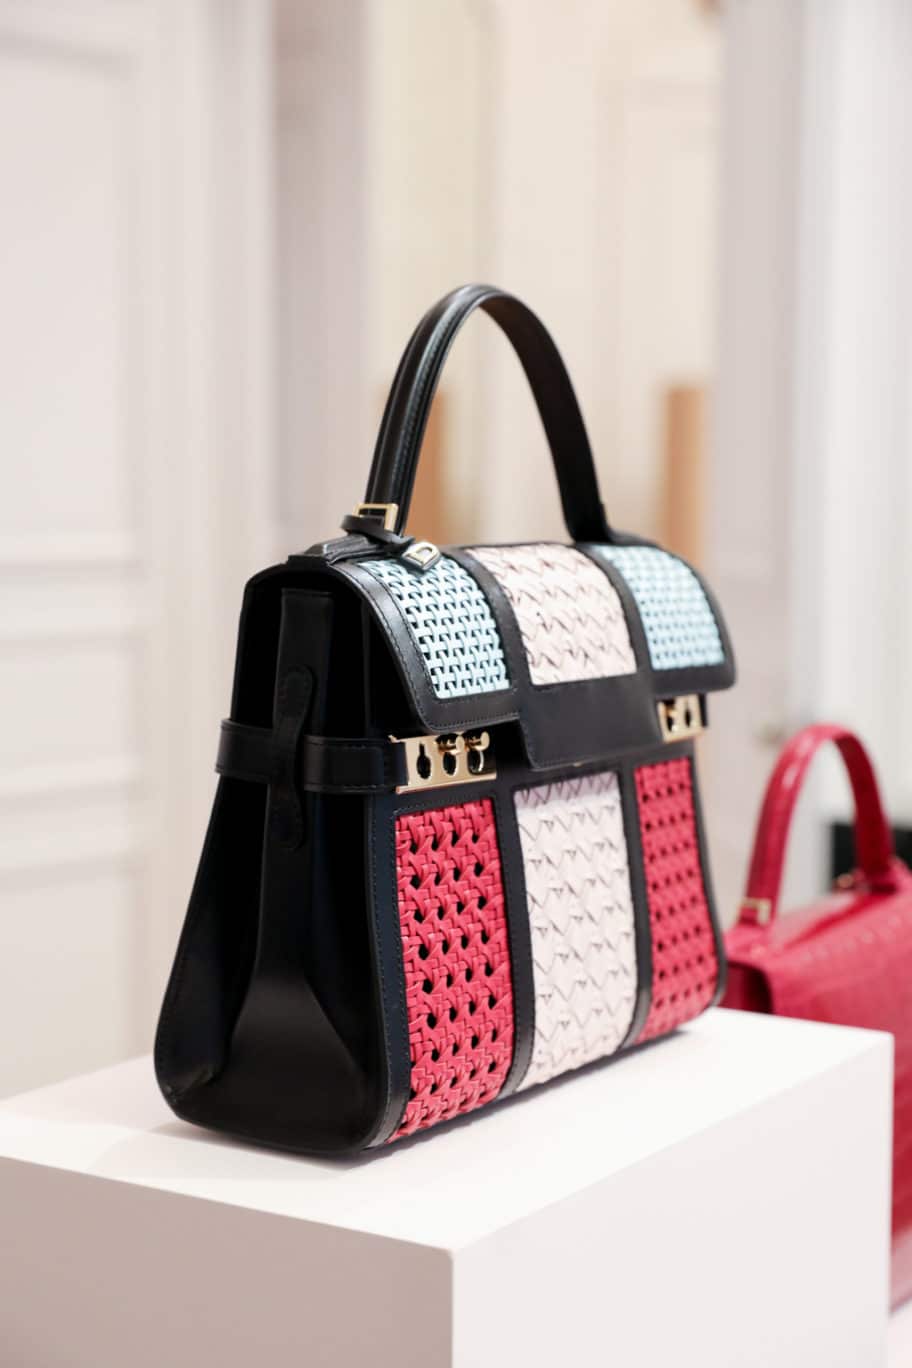 Preview Of Delvaux Spring/Summer 2019 Bag Collection | Spotted Fashion